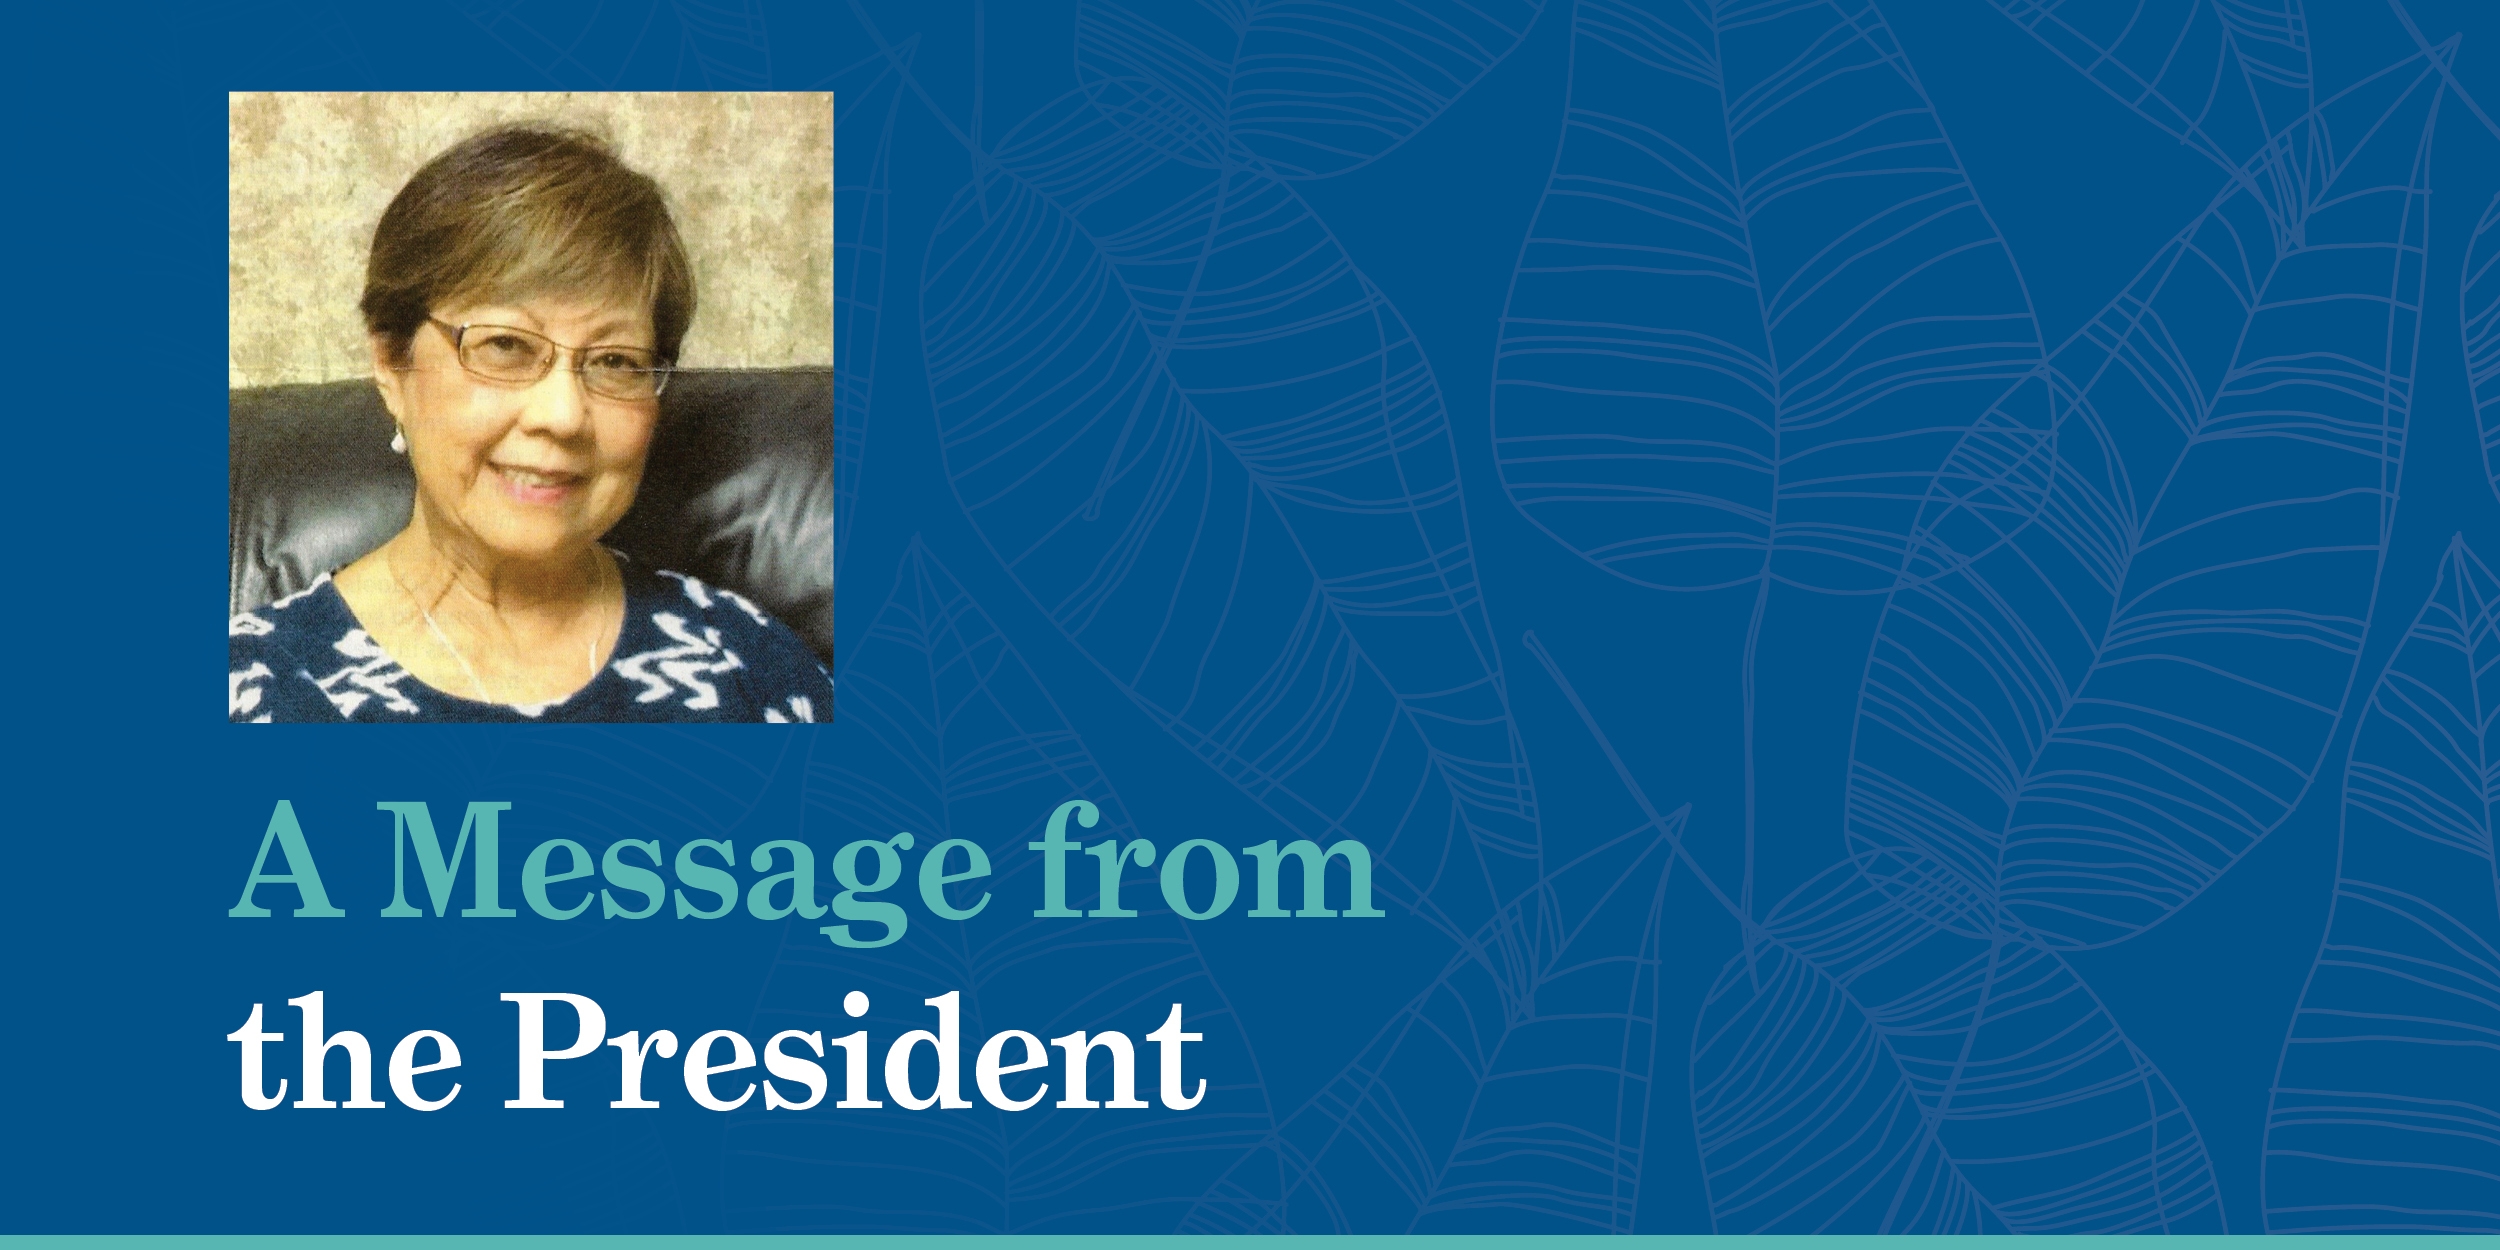 A Message from the President: Aloha!